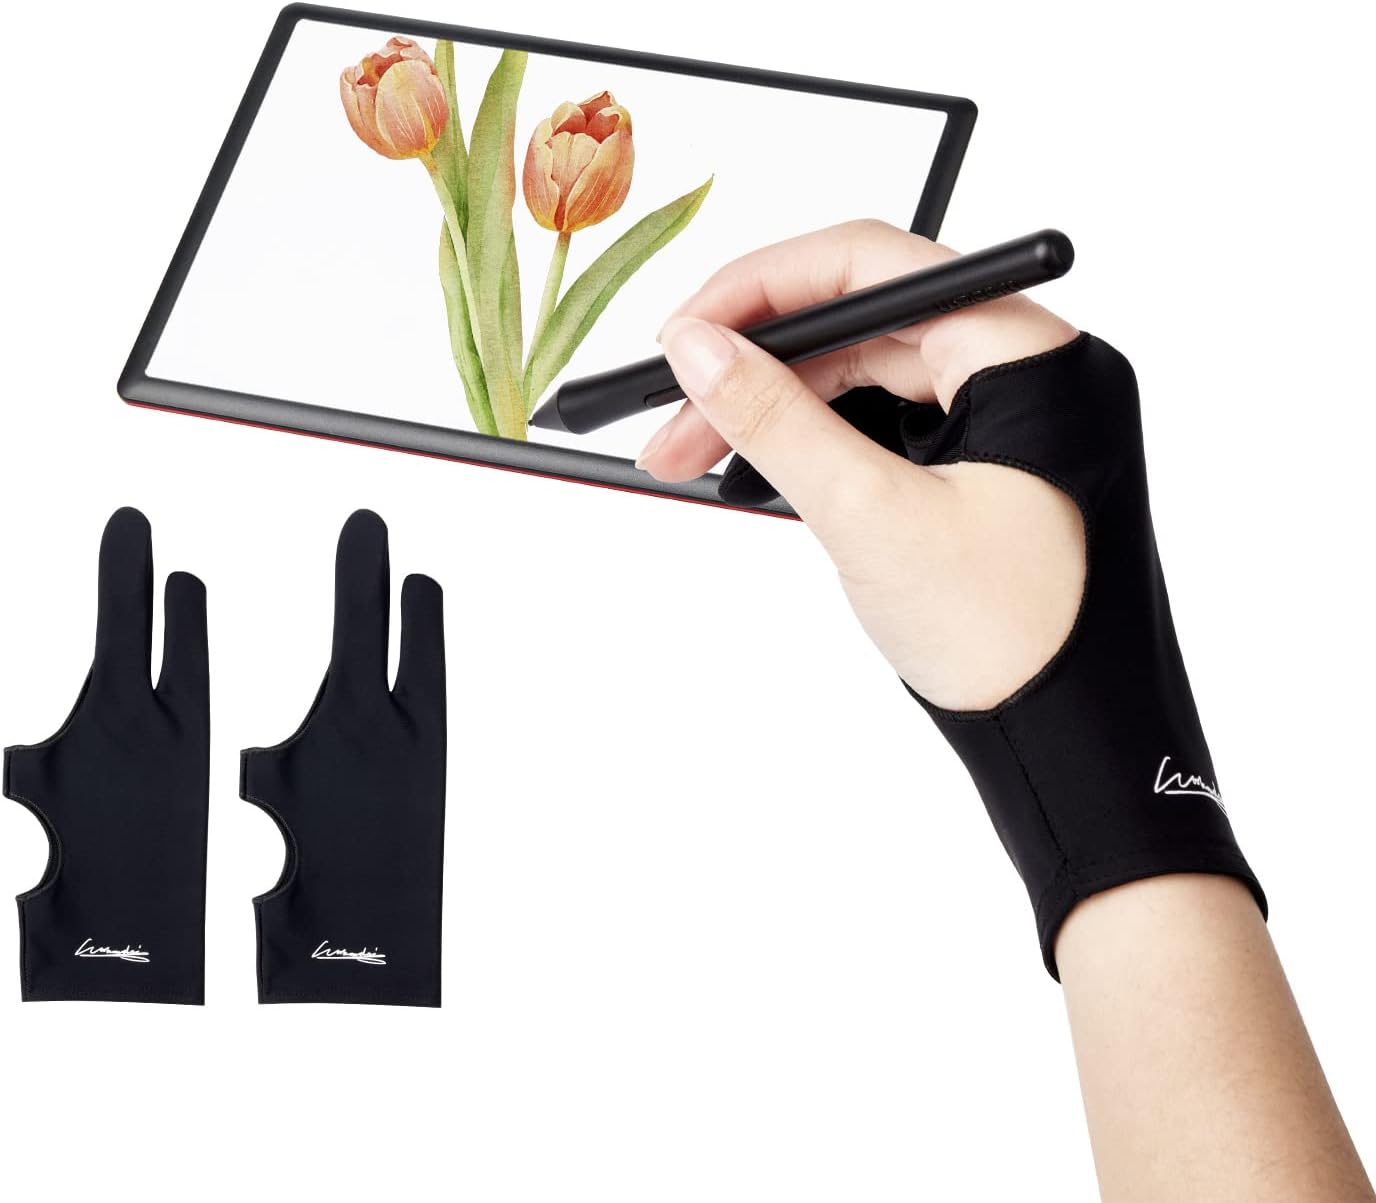 Digital Drawing Glove 2 Pack,Artist Glove for Drawing [...]